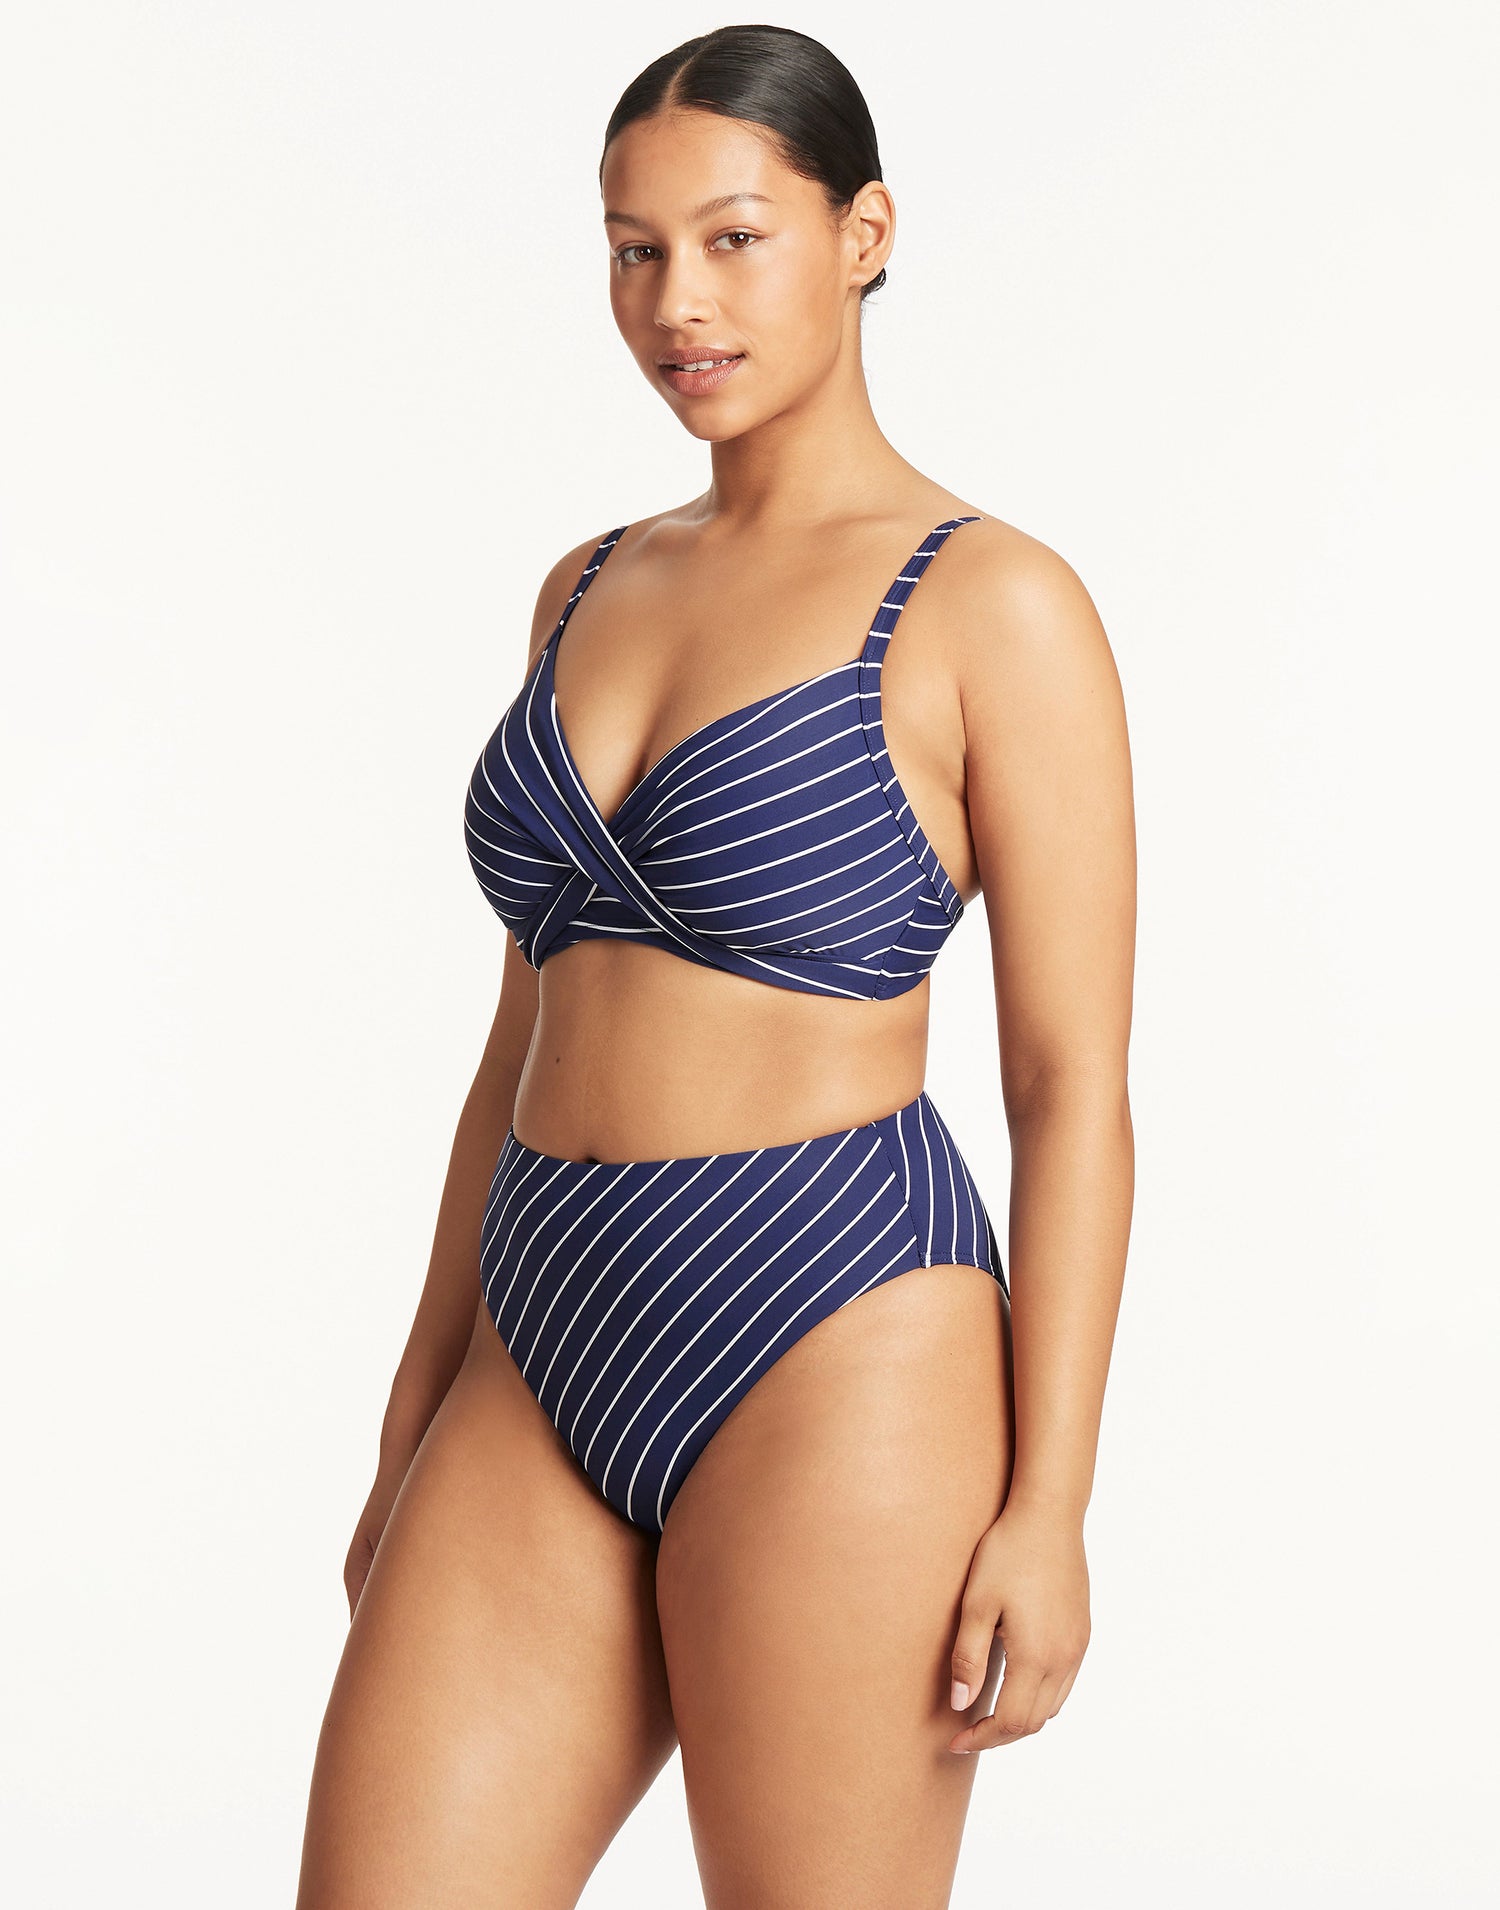 Shoreline Retro High Waist Bottom by Sea Level in Navy - Angled View